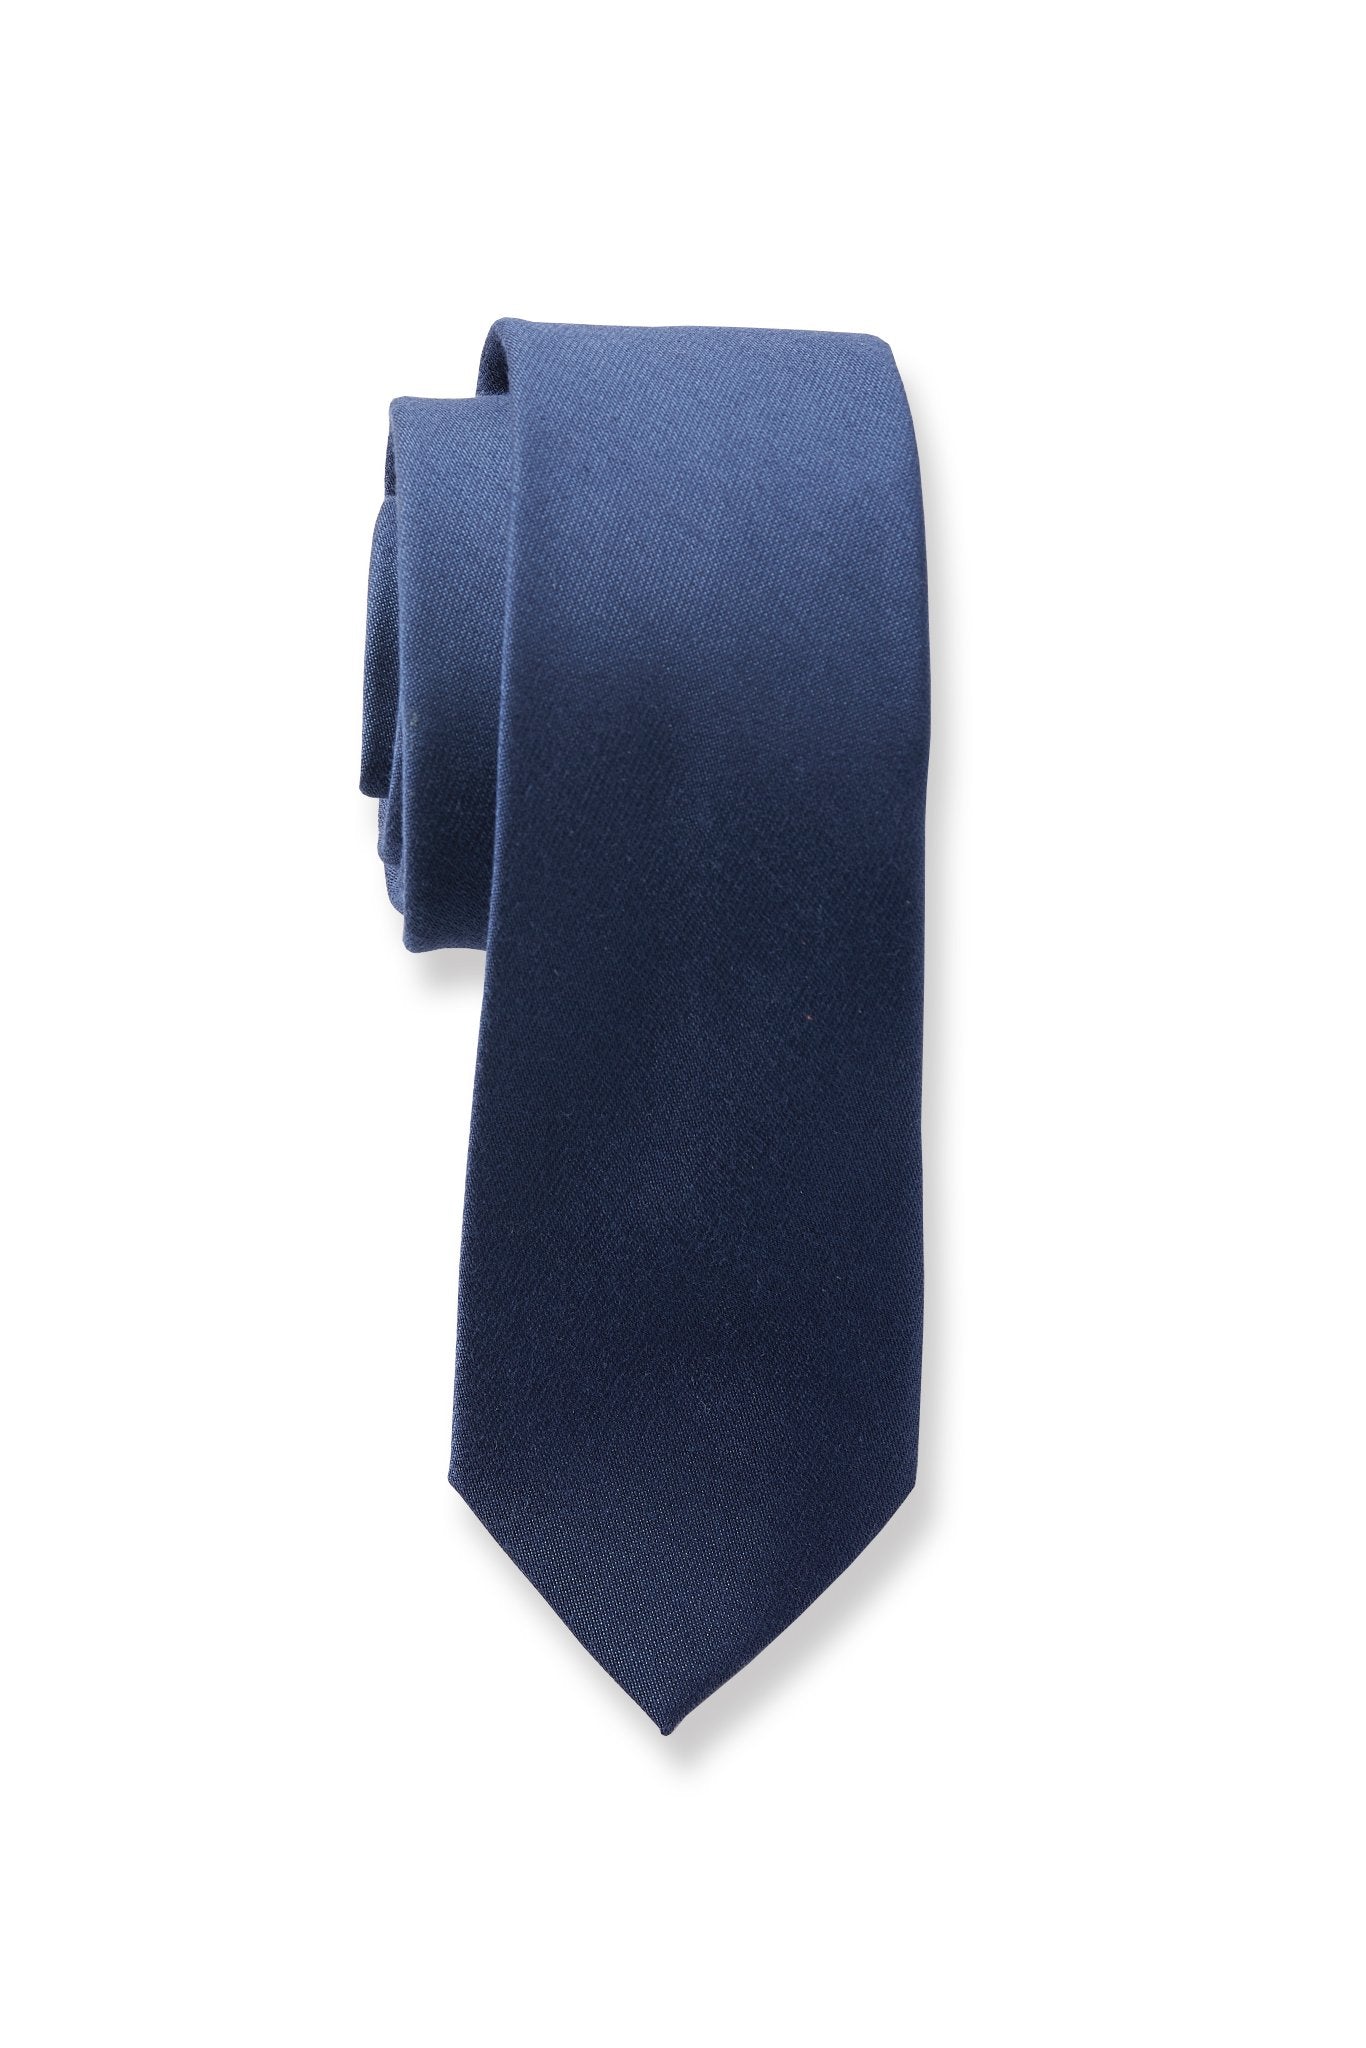 Simon Necktie in Slate Blue by Birdy Grey, front view